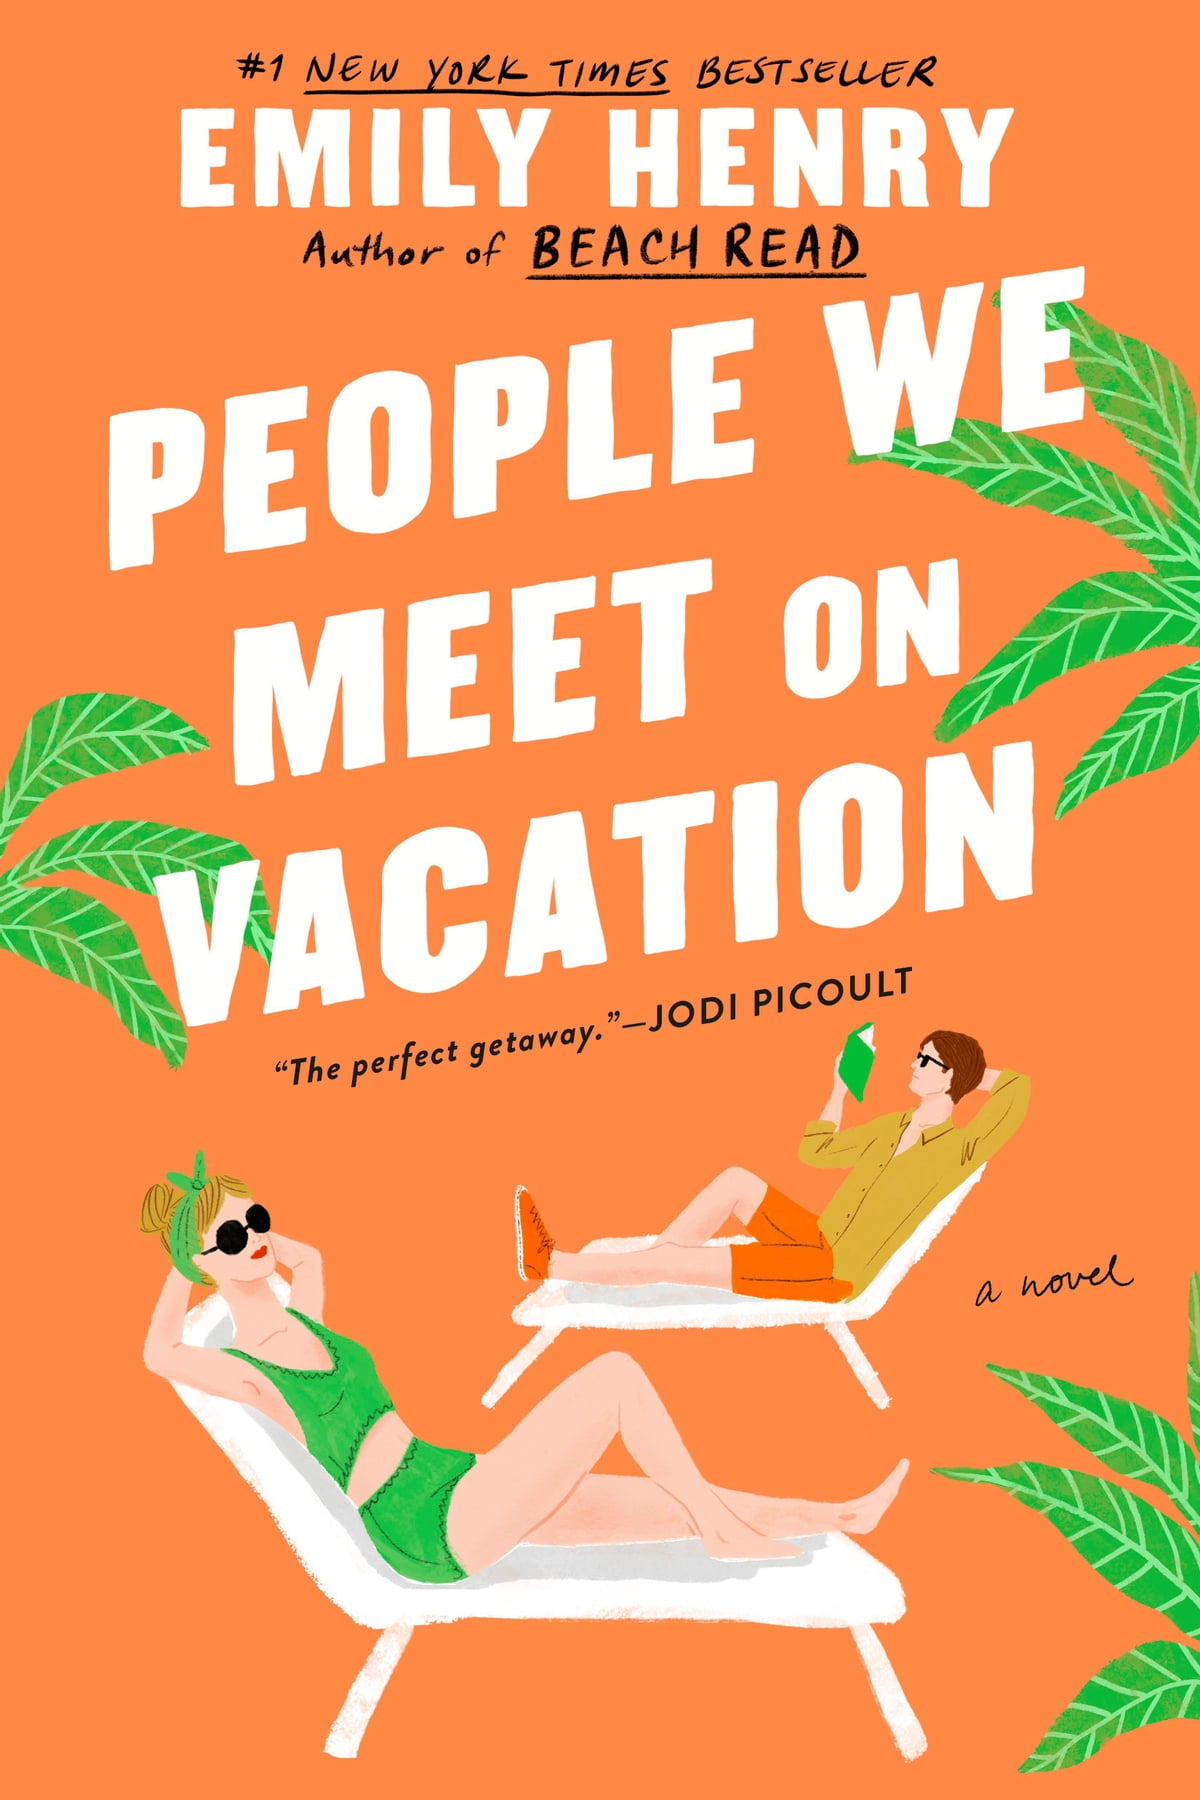 Graphic image of the book cover for People We Meet on Vacation